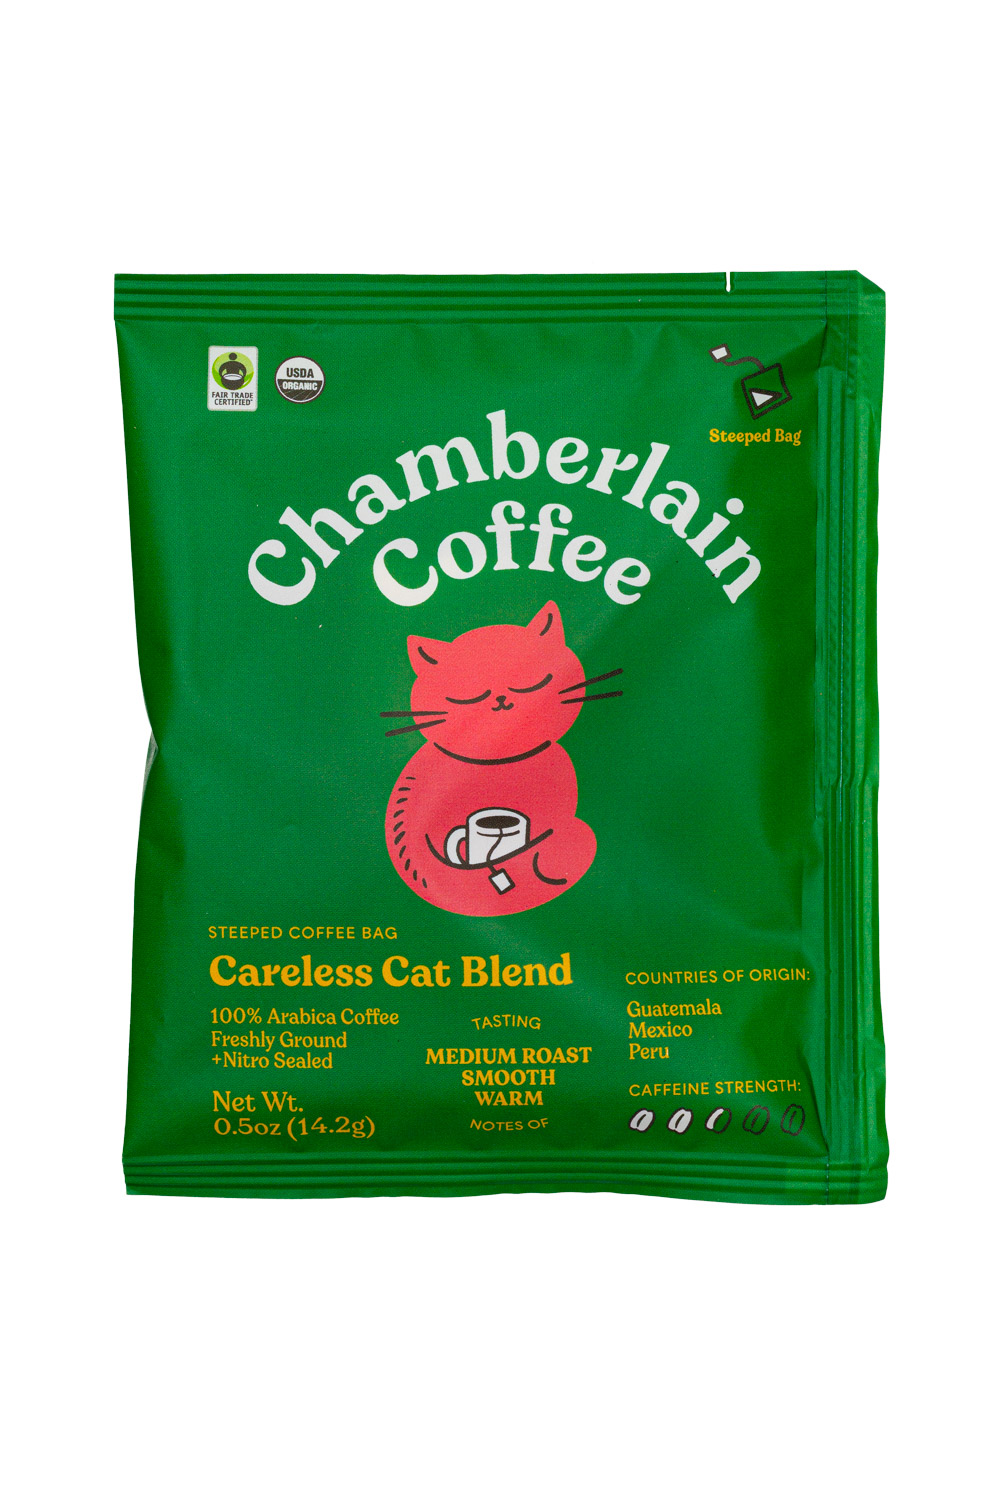 Chamberlain Coffee Launches Environmentally Friendly Coffee Pods